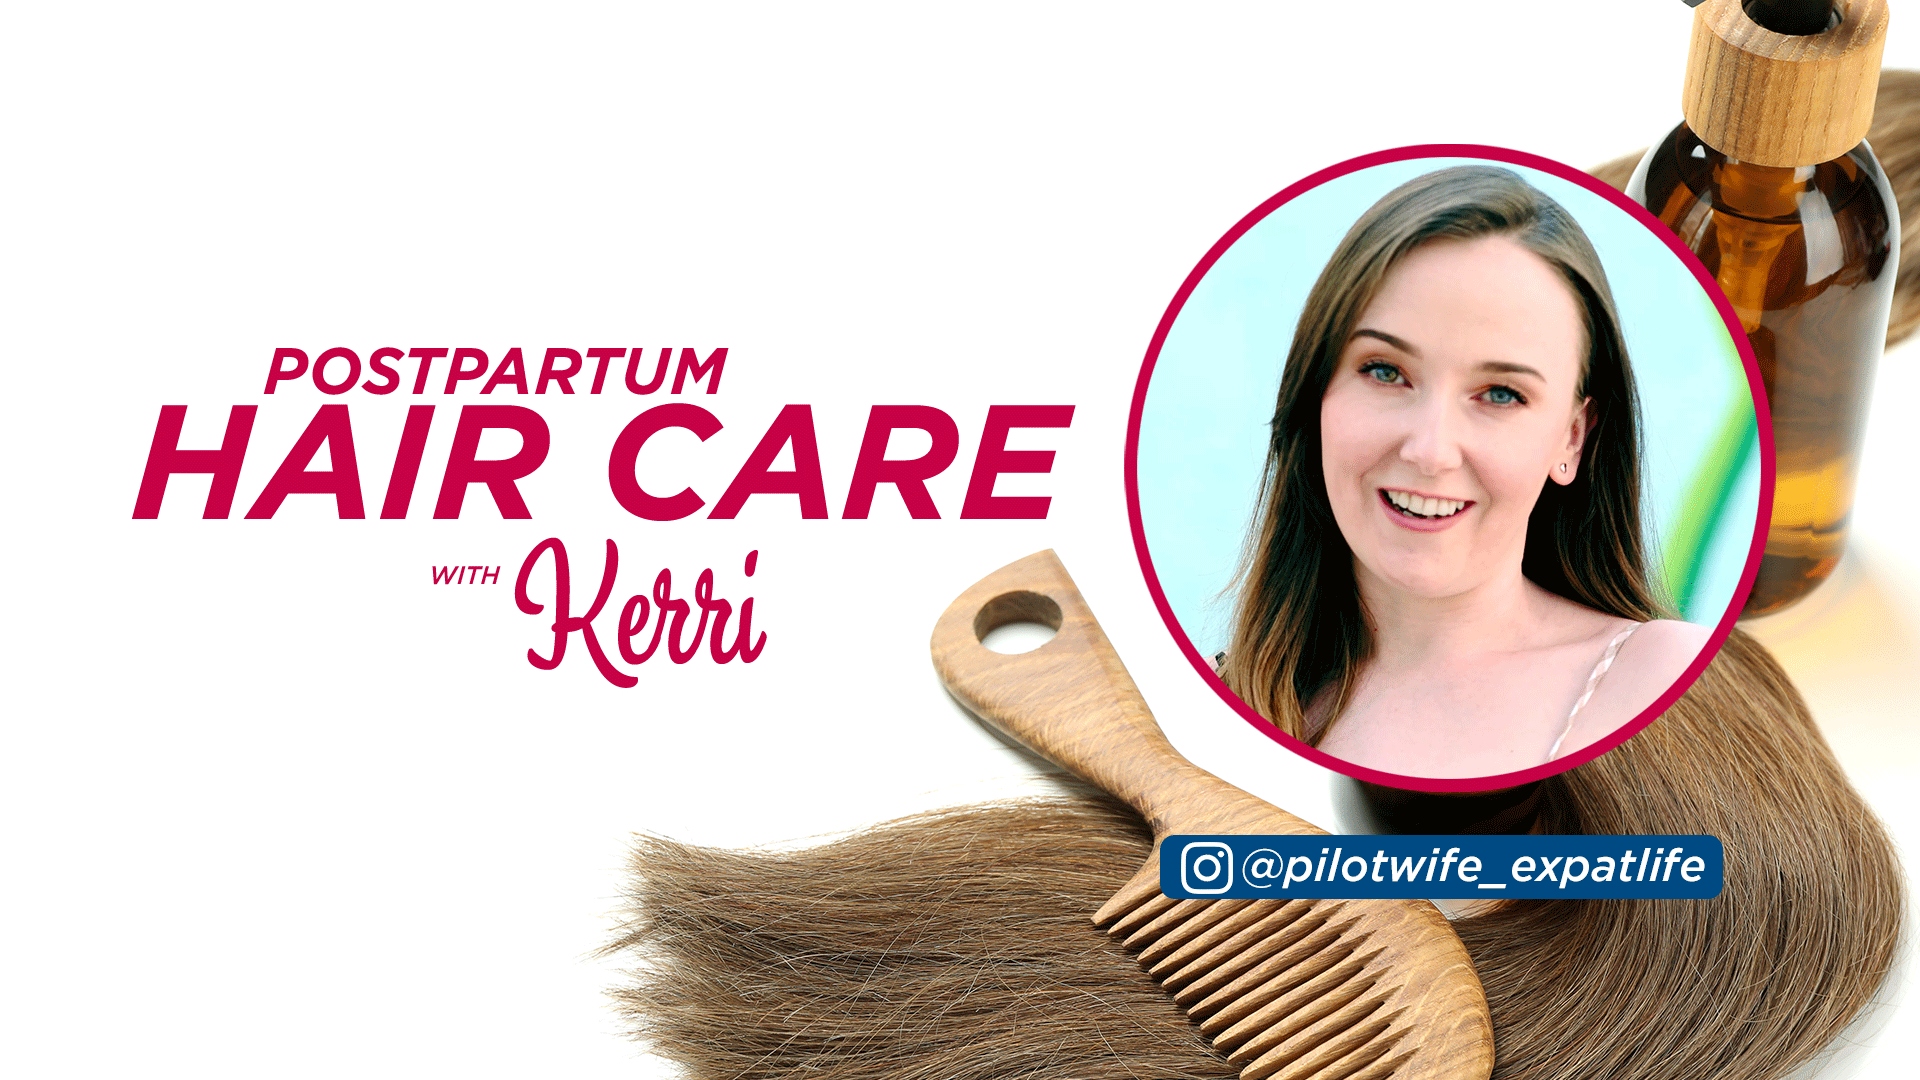 How to Care for your Postpartum Hair? Kerri Answers!